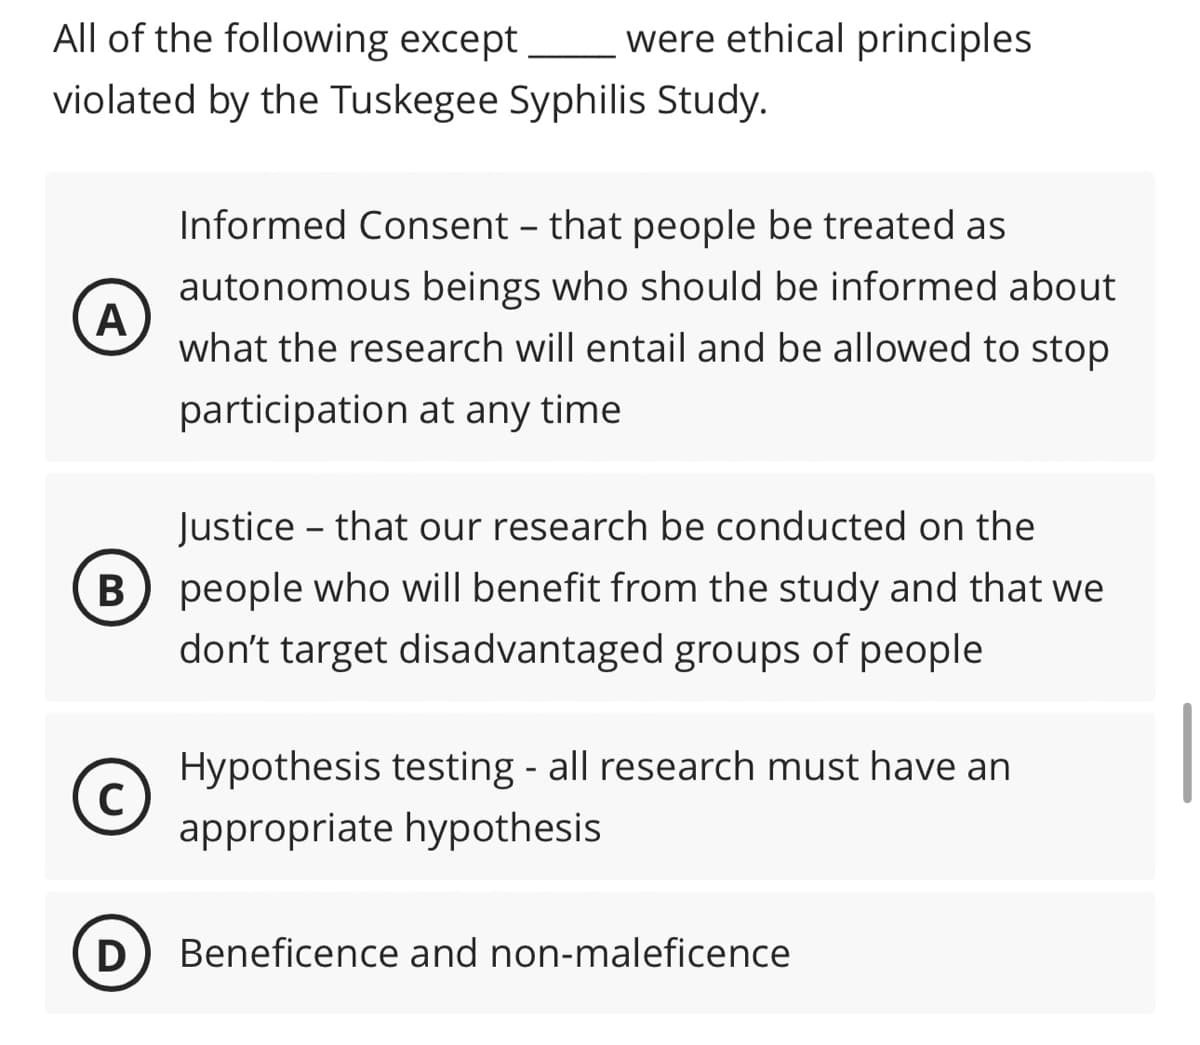 All of the following except were ethical principles
violated by the Tuskegee Syphilis Study.
A
Justice that our research be conducted on the
B) people who will benefit from the study and that we
don't target disadvantaged groups of people
C
Informed Consent - that people be treated as
autonomous beings who should be informed about
what the research will entail and be allowed to stop
participation at any time
D
-
Hypothesis testing - all research must have an
appropriate hypothesis
Beneficence and non-maleficence